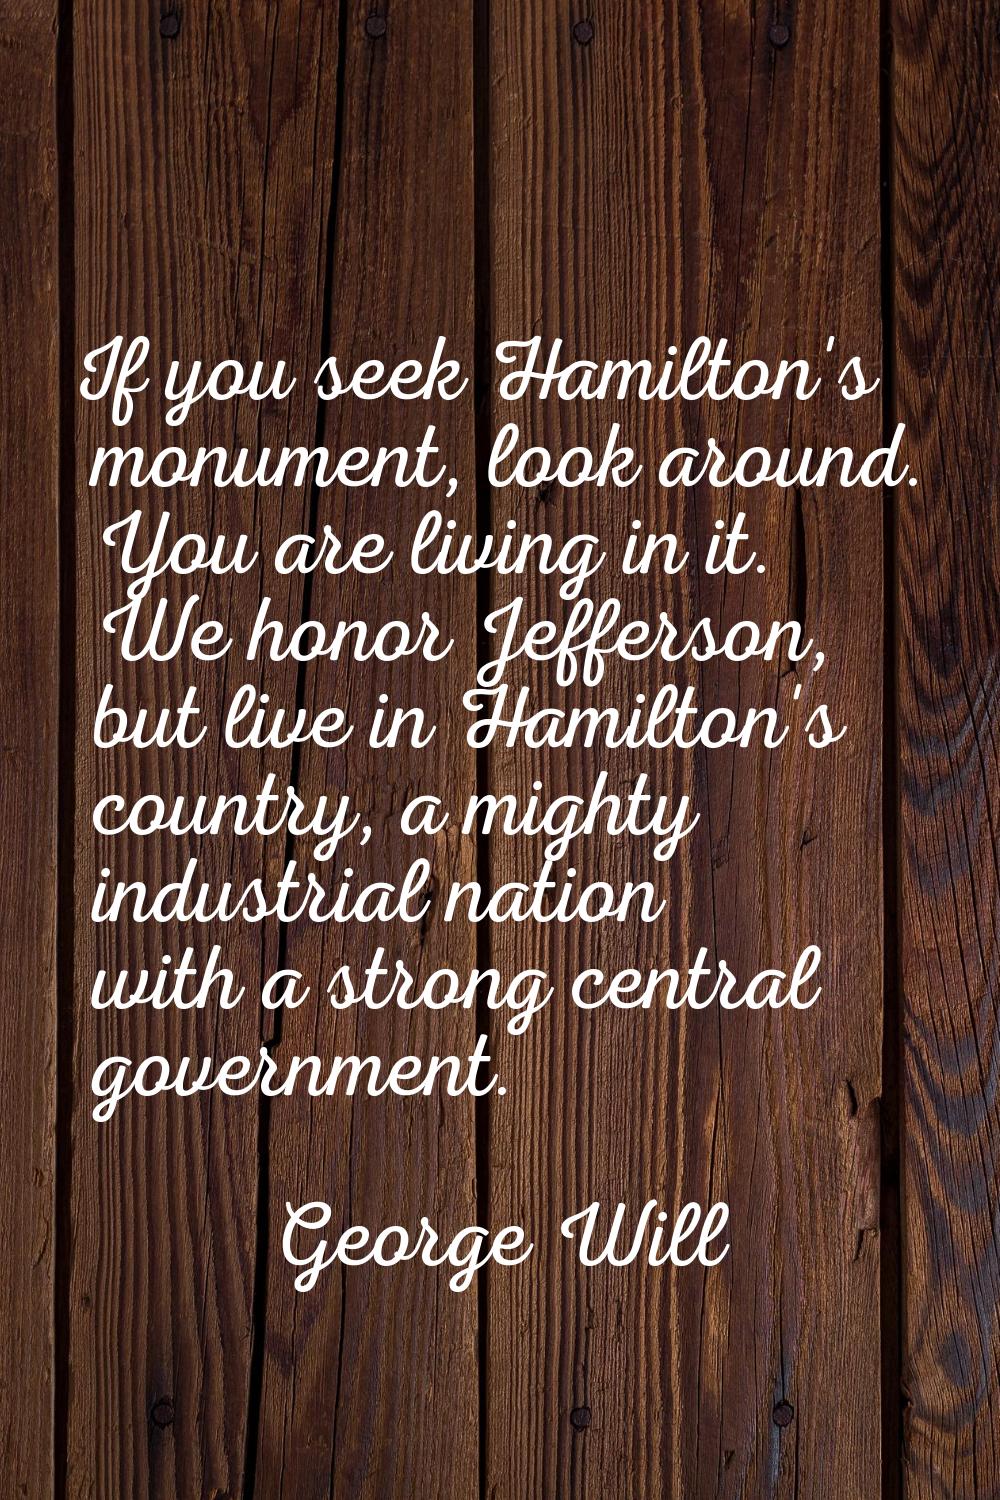 If you seek Hamilton's monument, look around. You are living in it. We honor Jefferson, but live in